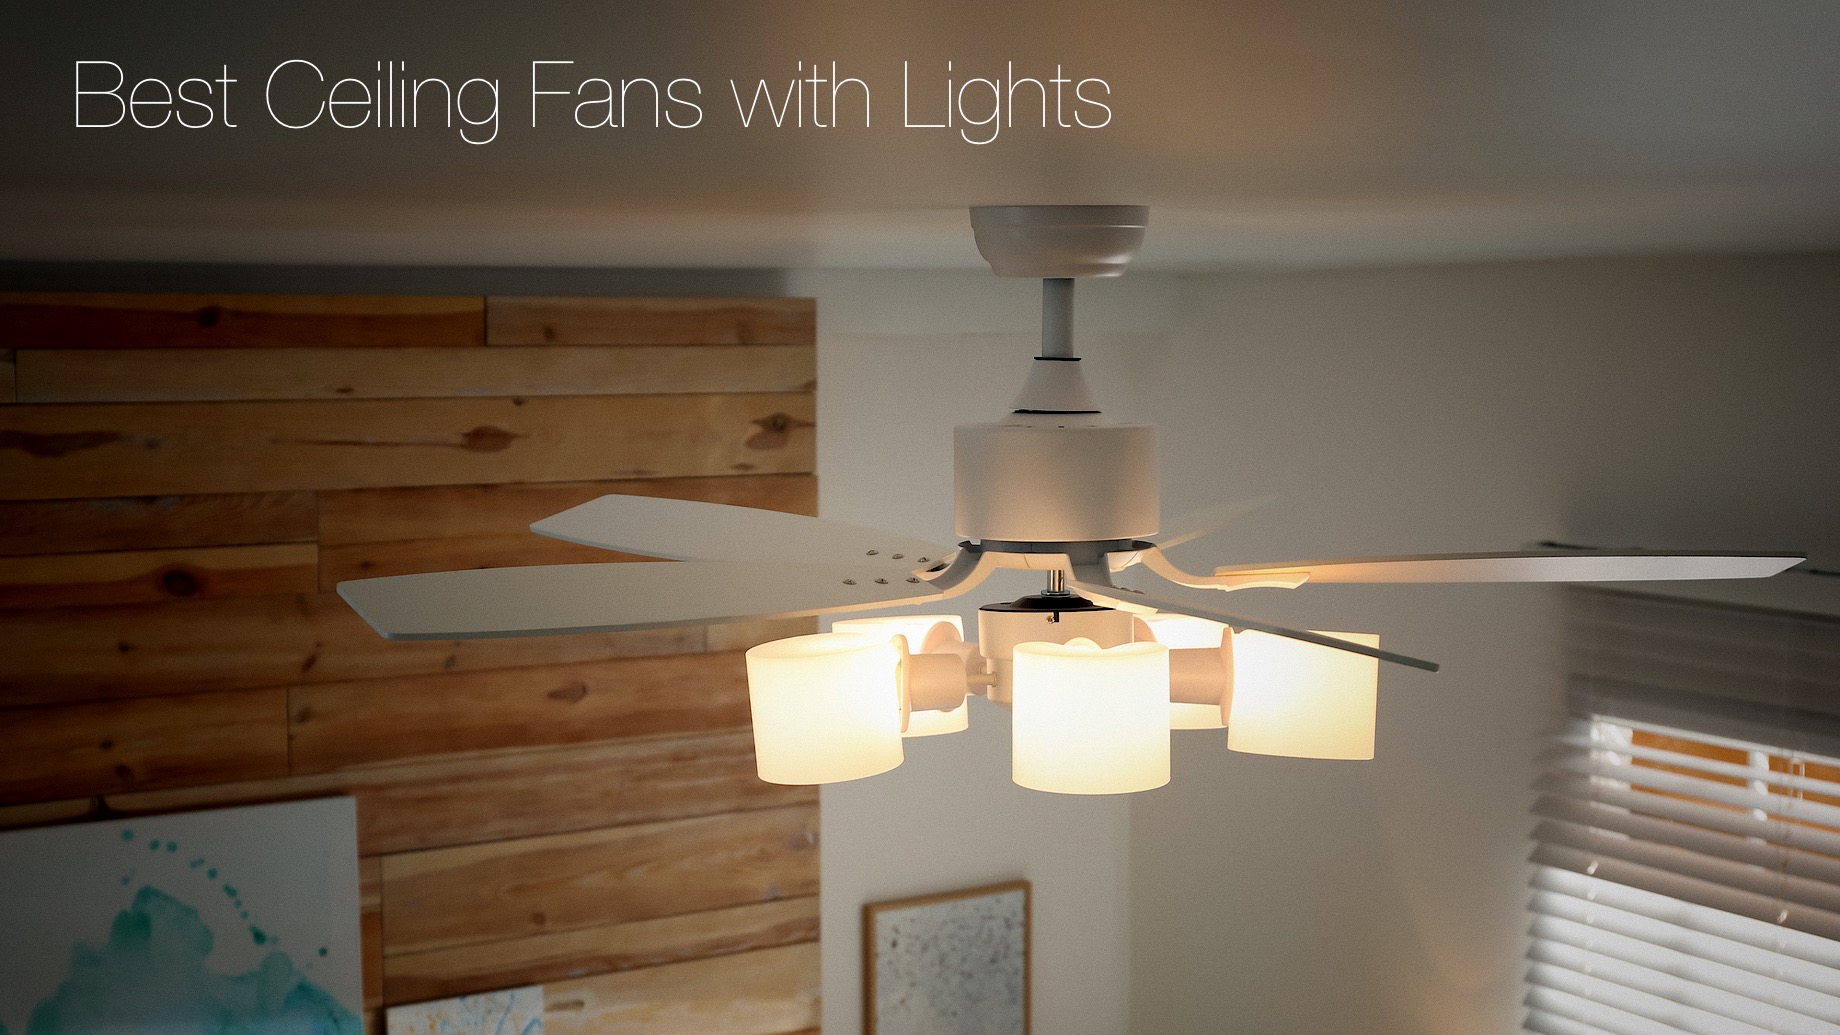 Best Ceiling Fans with Lights in 2021 – The Pinnacle List